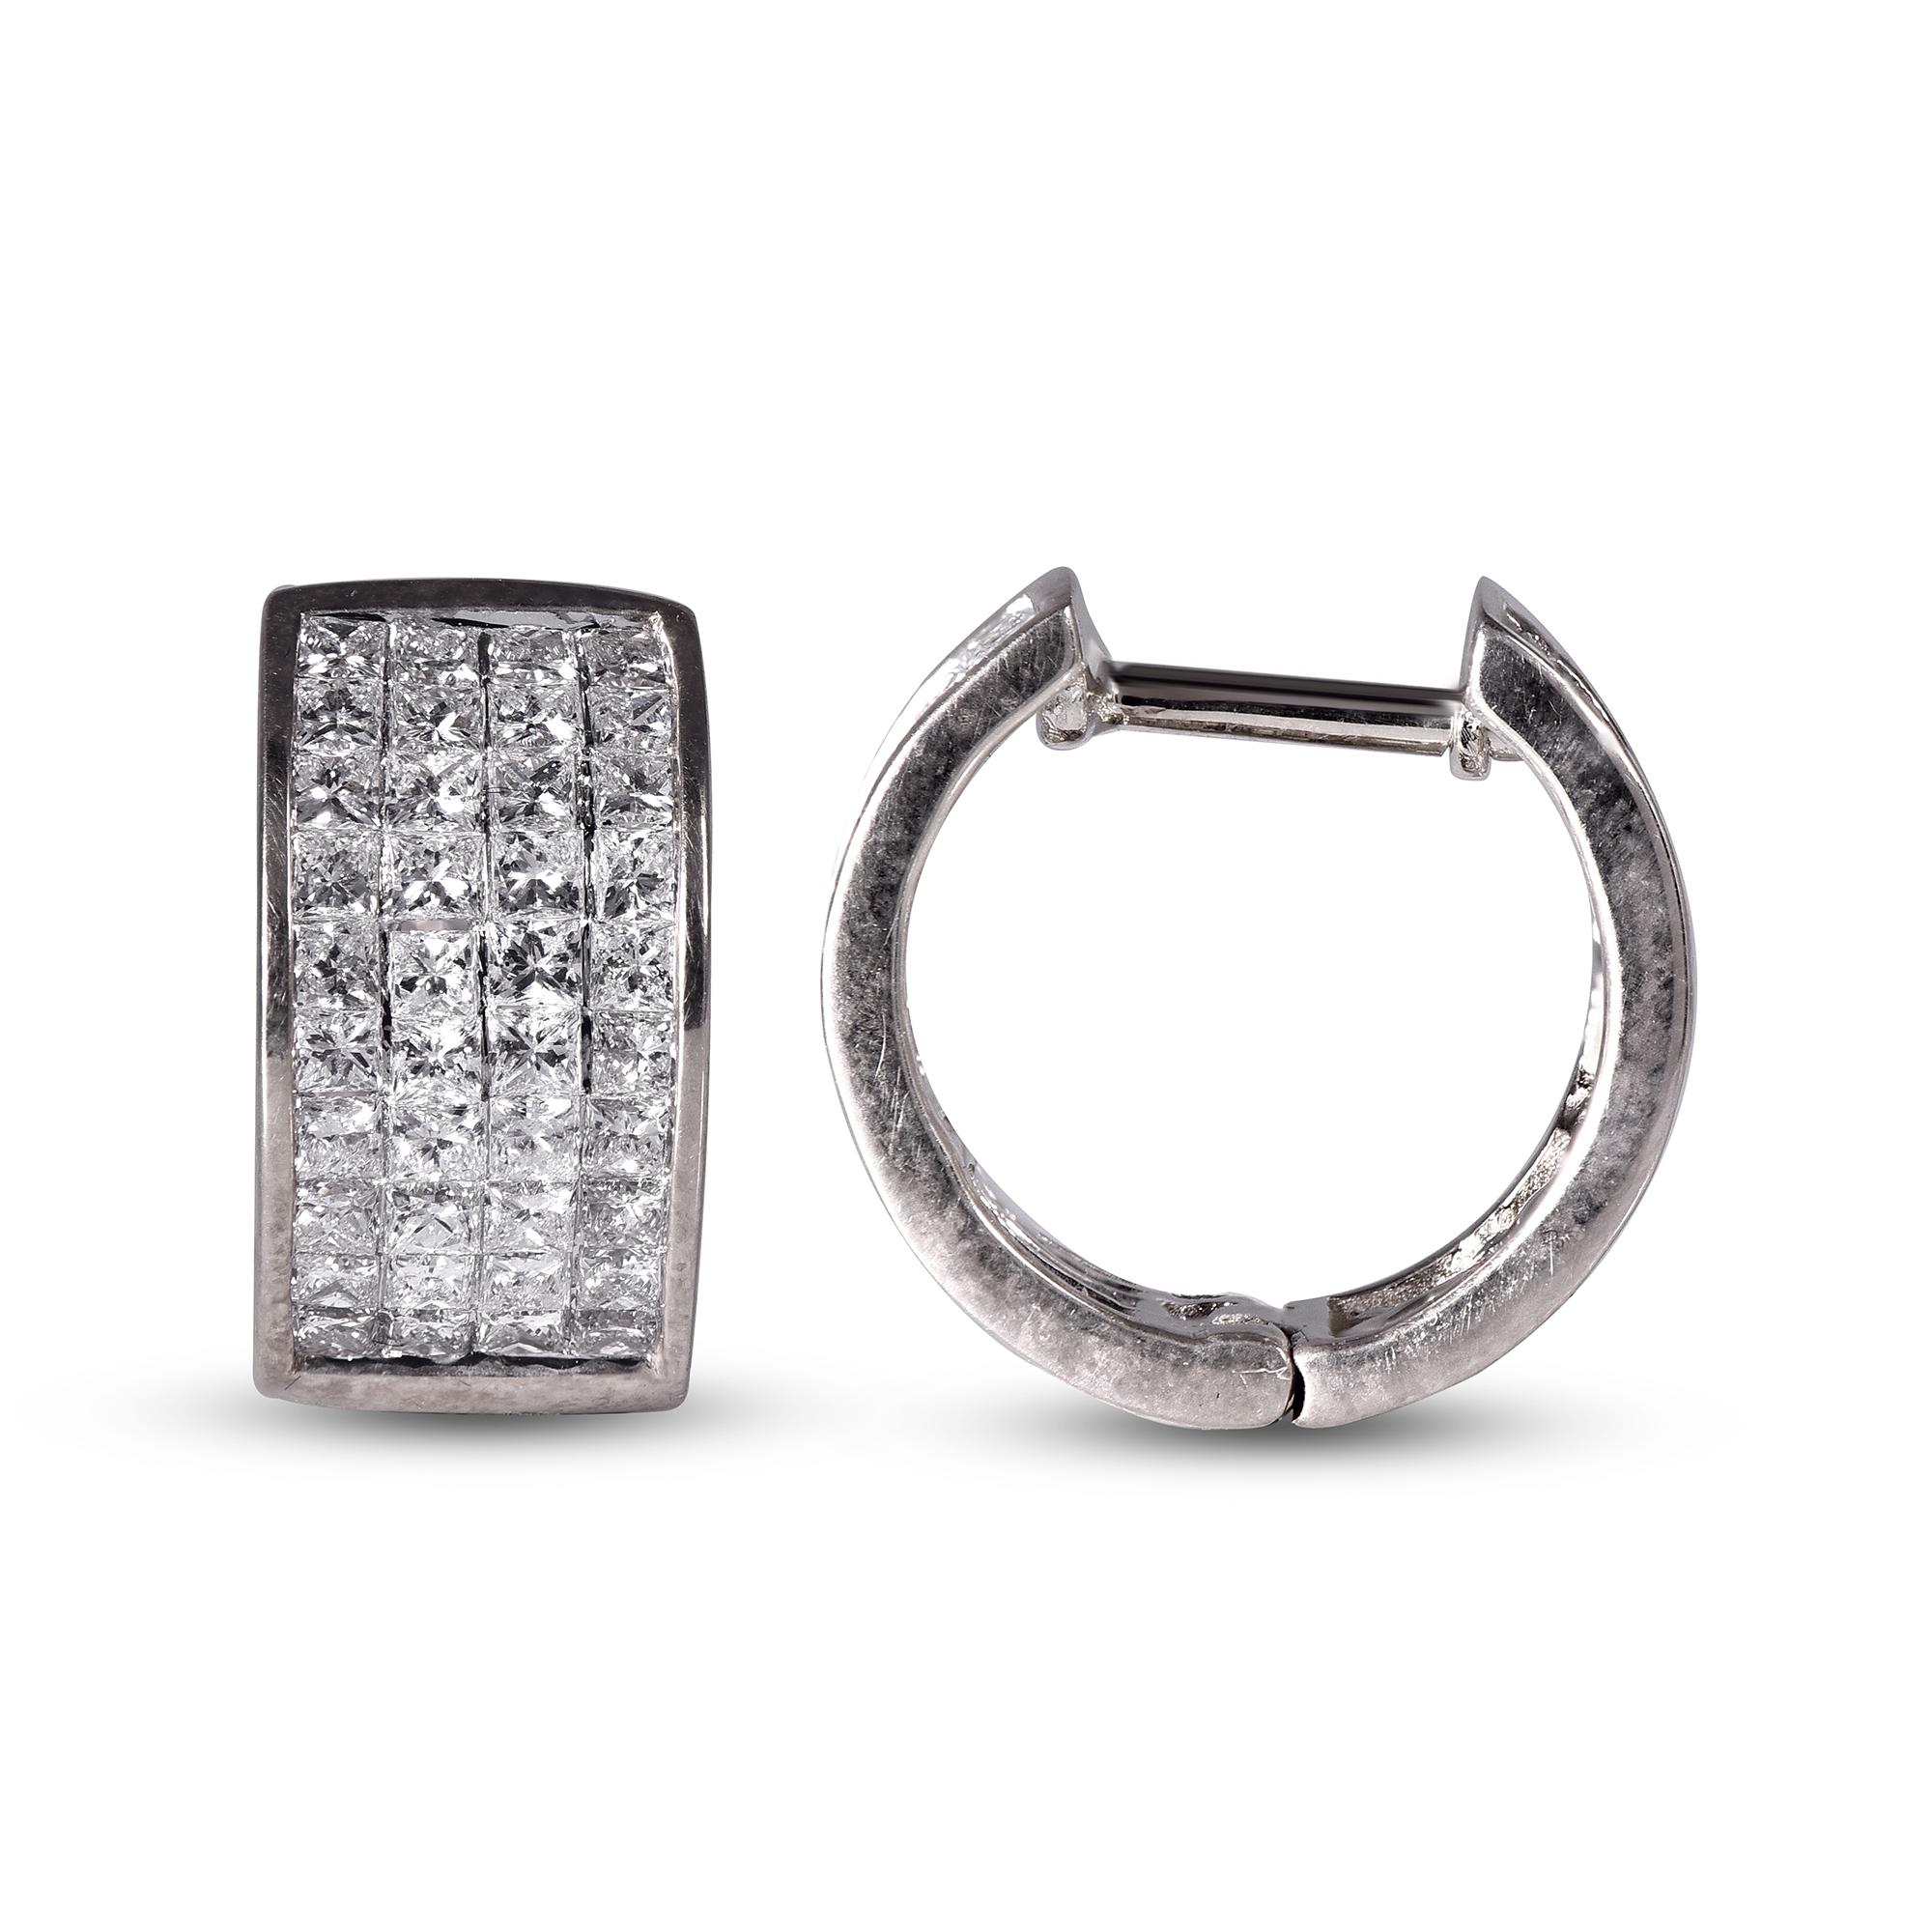 TJD 1.50 Carat Princess Cut Diamond 14K White Gold Invisible Set Huggie Earrings In New Condition For Sale In New York, NY